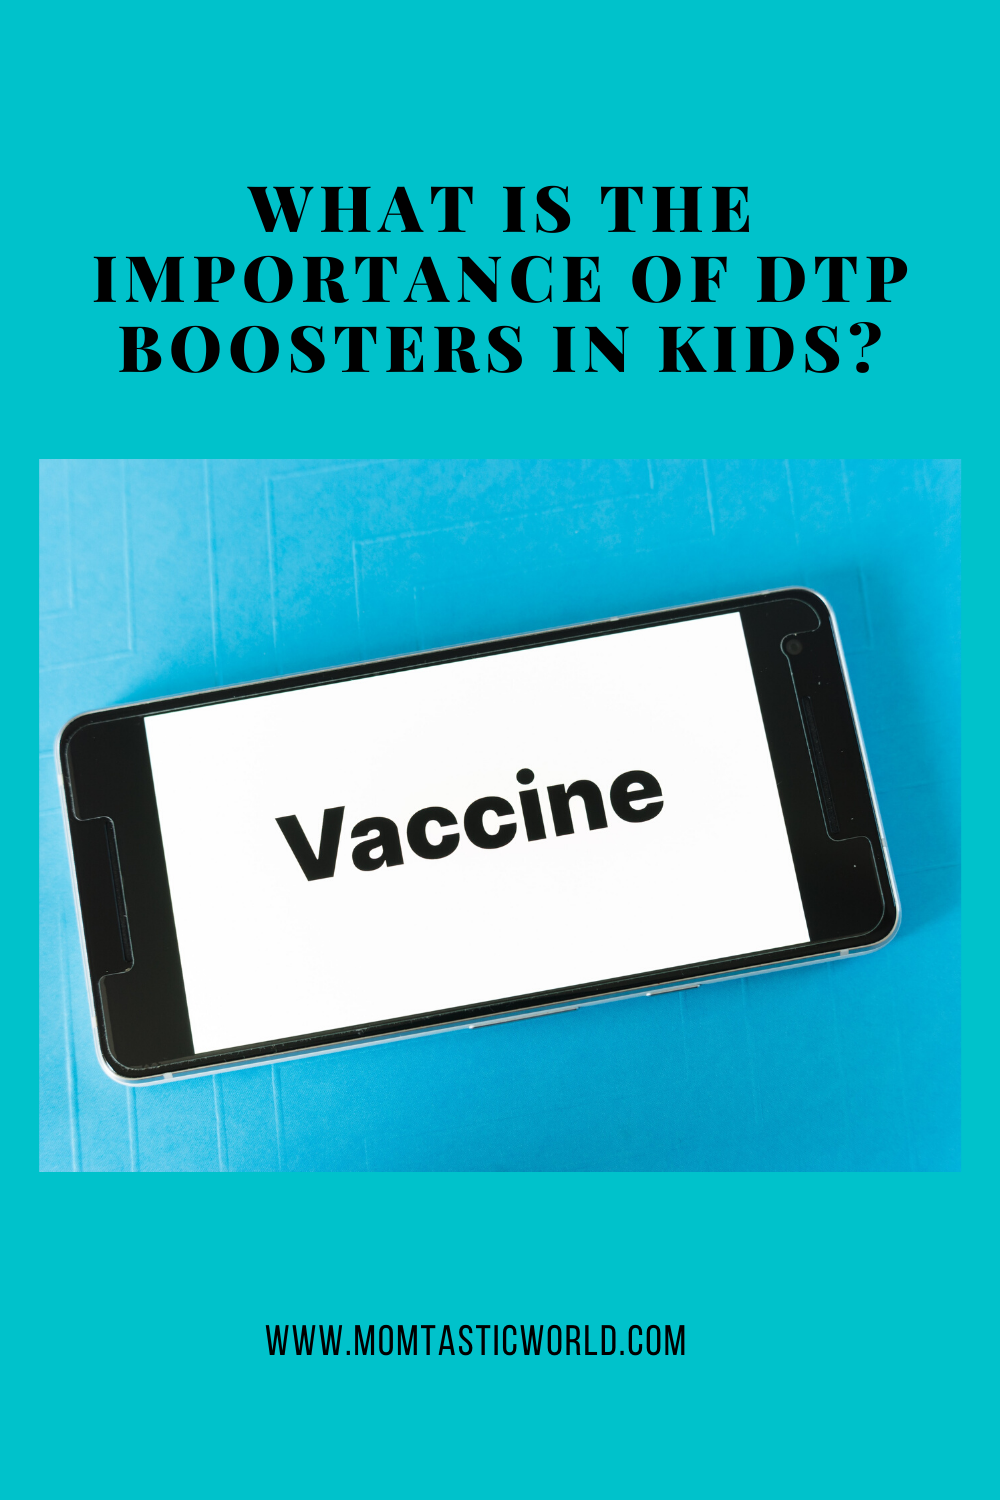 What Is The Importance Of DTP Boosters In Kids?